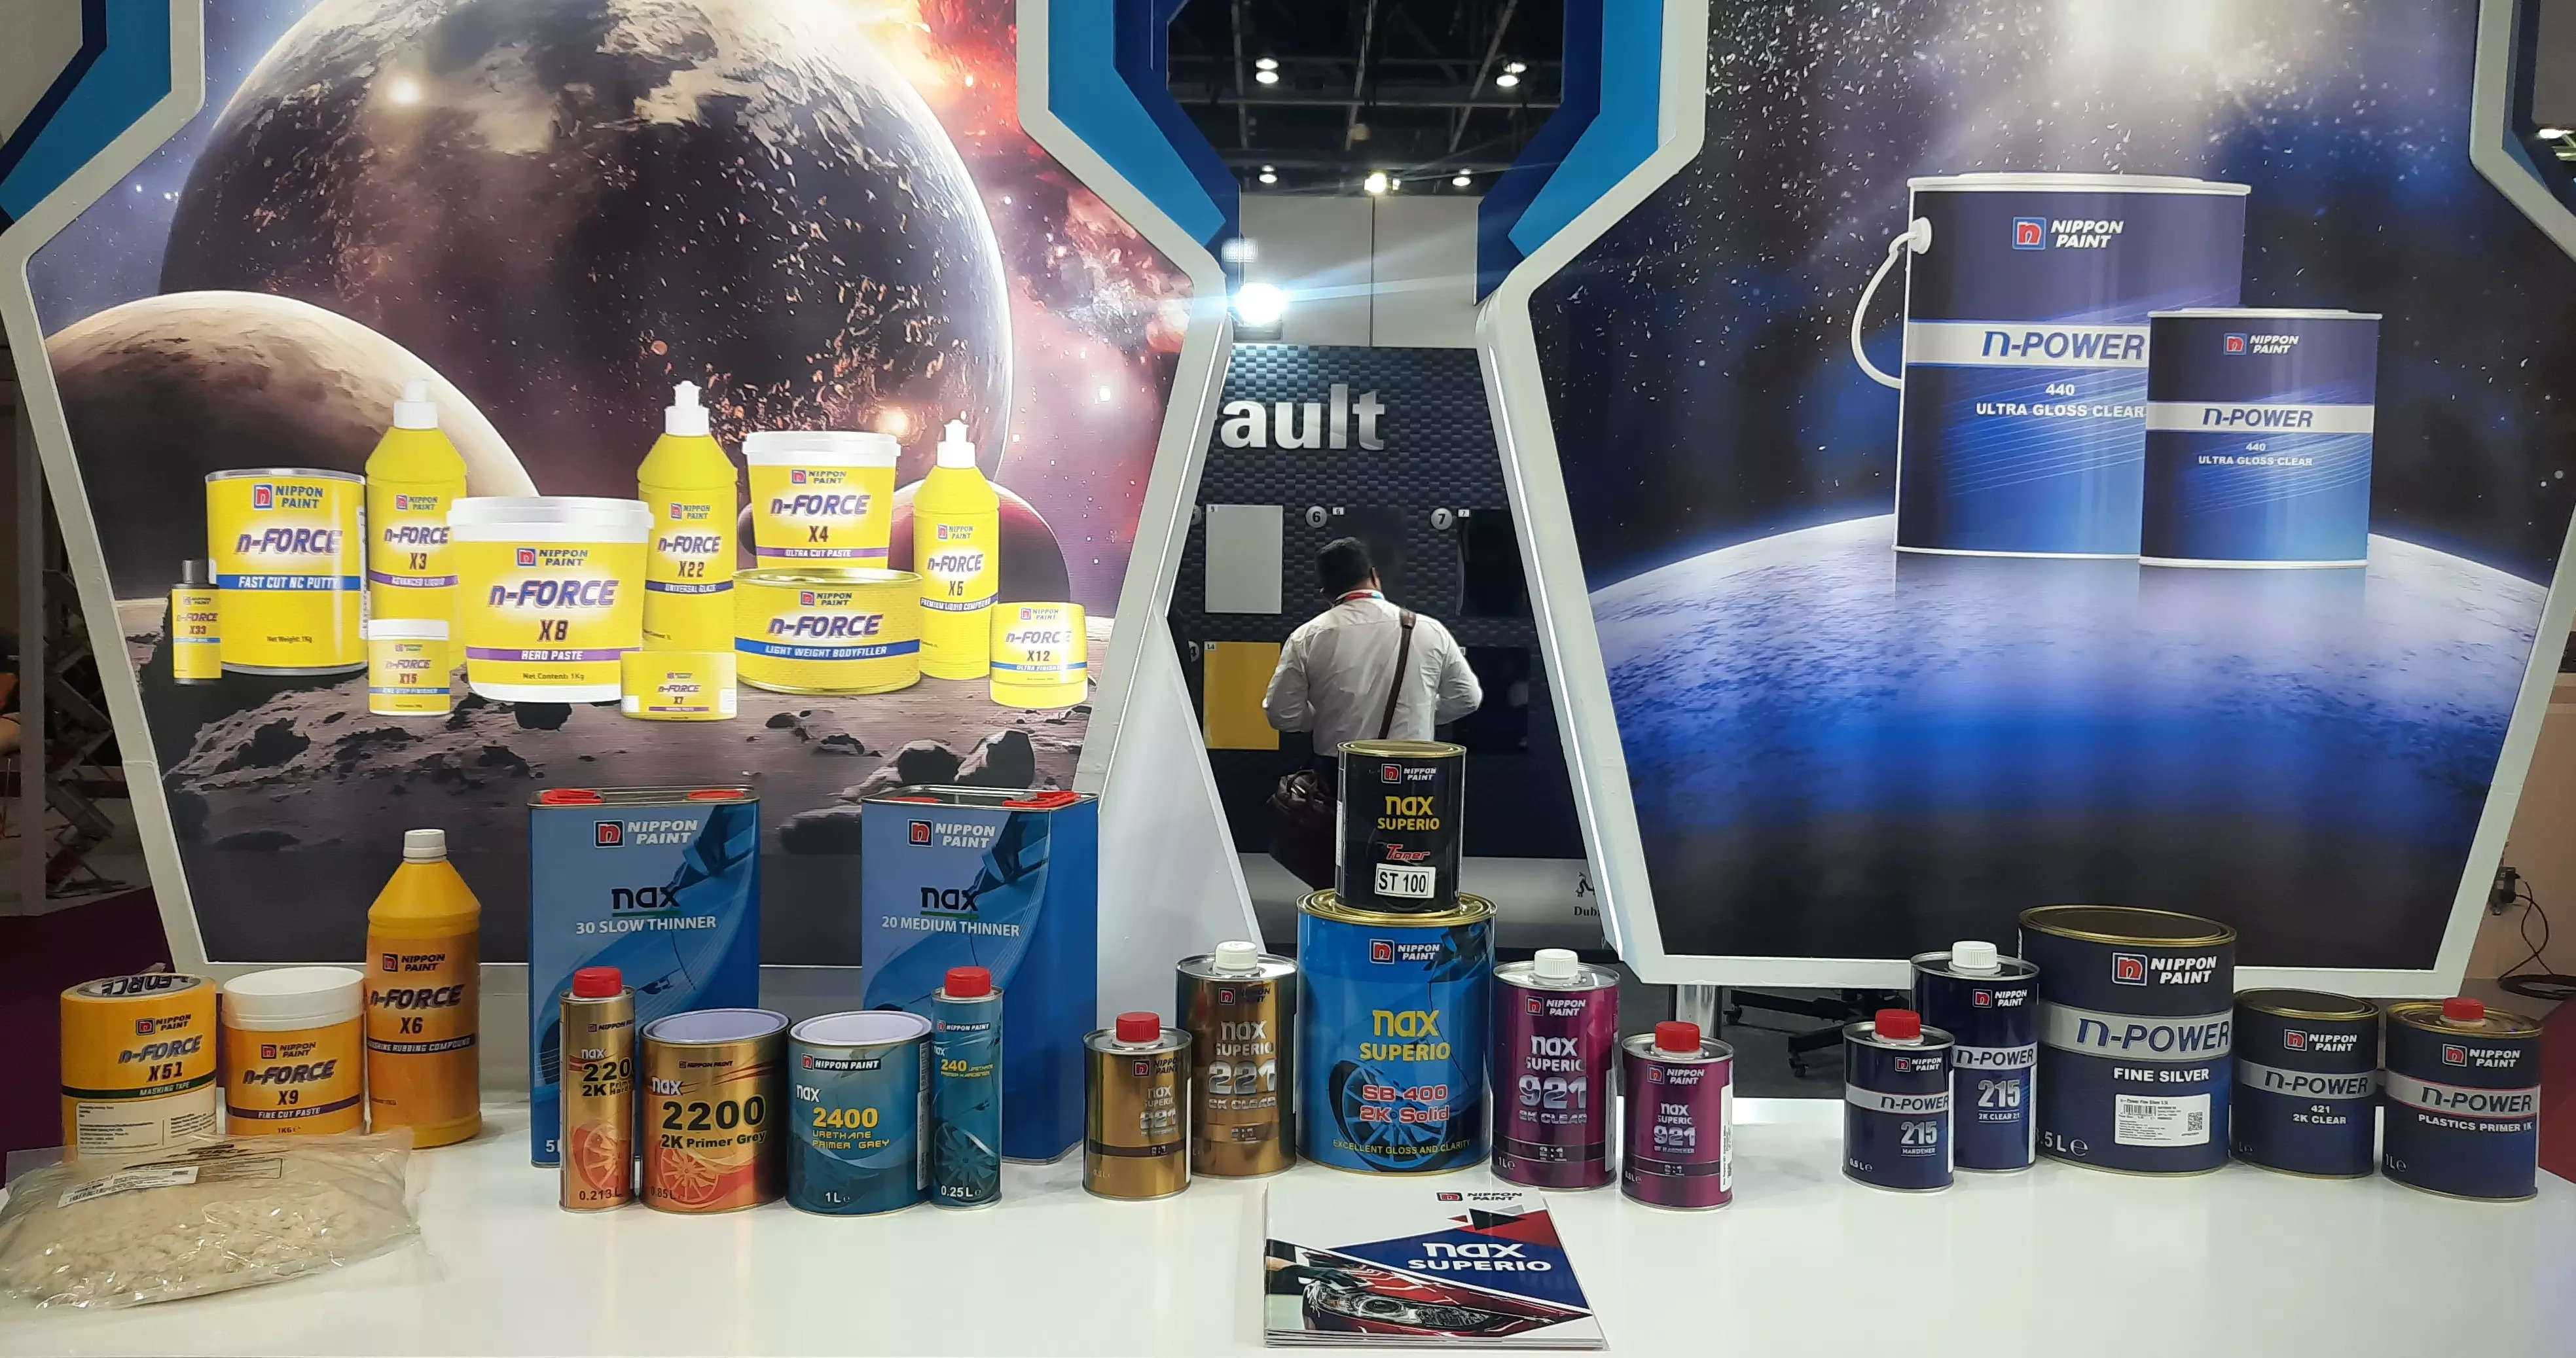 <p>At the Automechanika Dubai this year, Nippon showcased automotive refinish products from the paint and non-paint categories, including the Nippon N-Force and N-Power brands; and the Nax 921 and 922 automotive clear coats.</p>